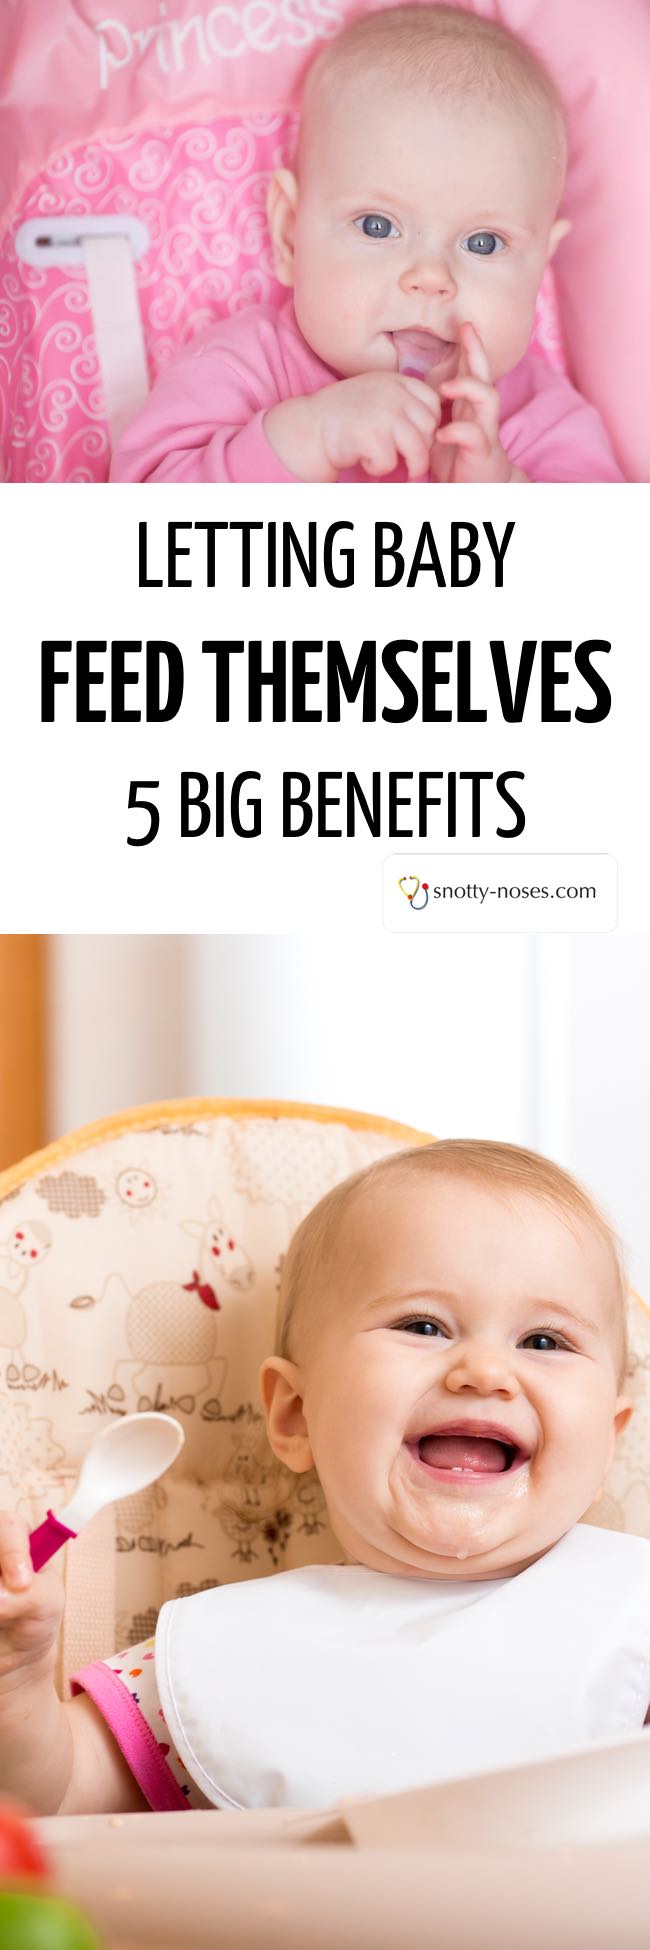  Letting Baby Feed Themselves. 5 Big Benefits of allowing your baby to take control of feeding themselves.